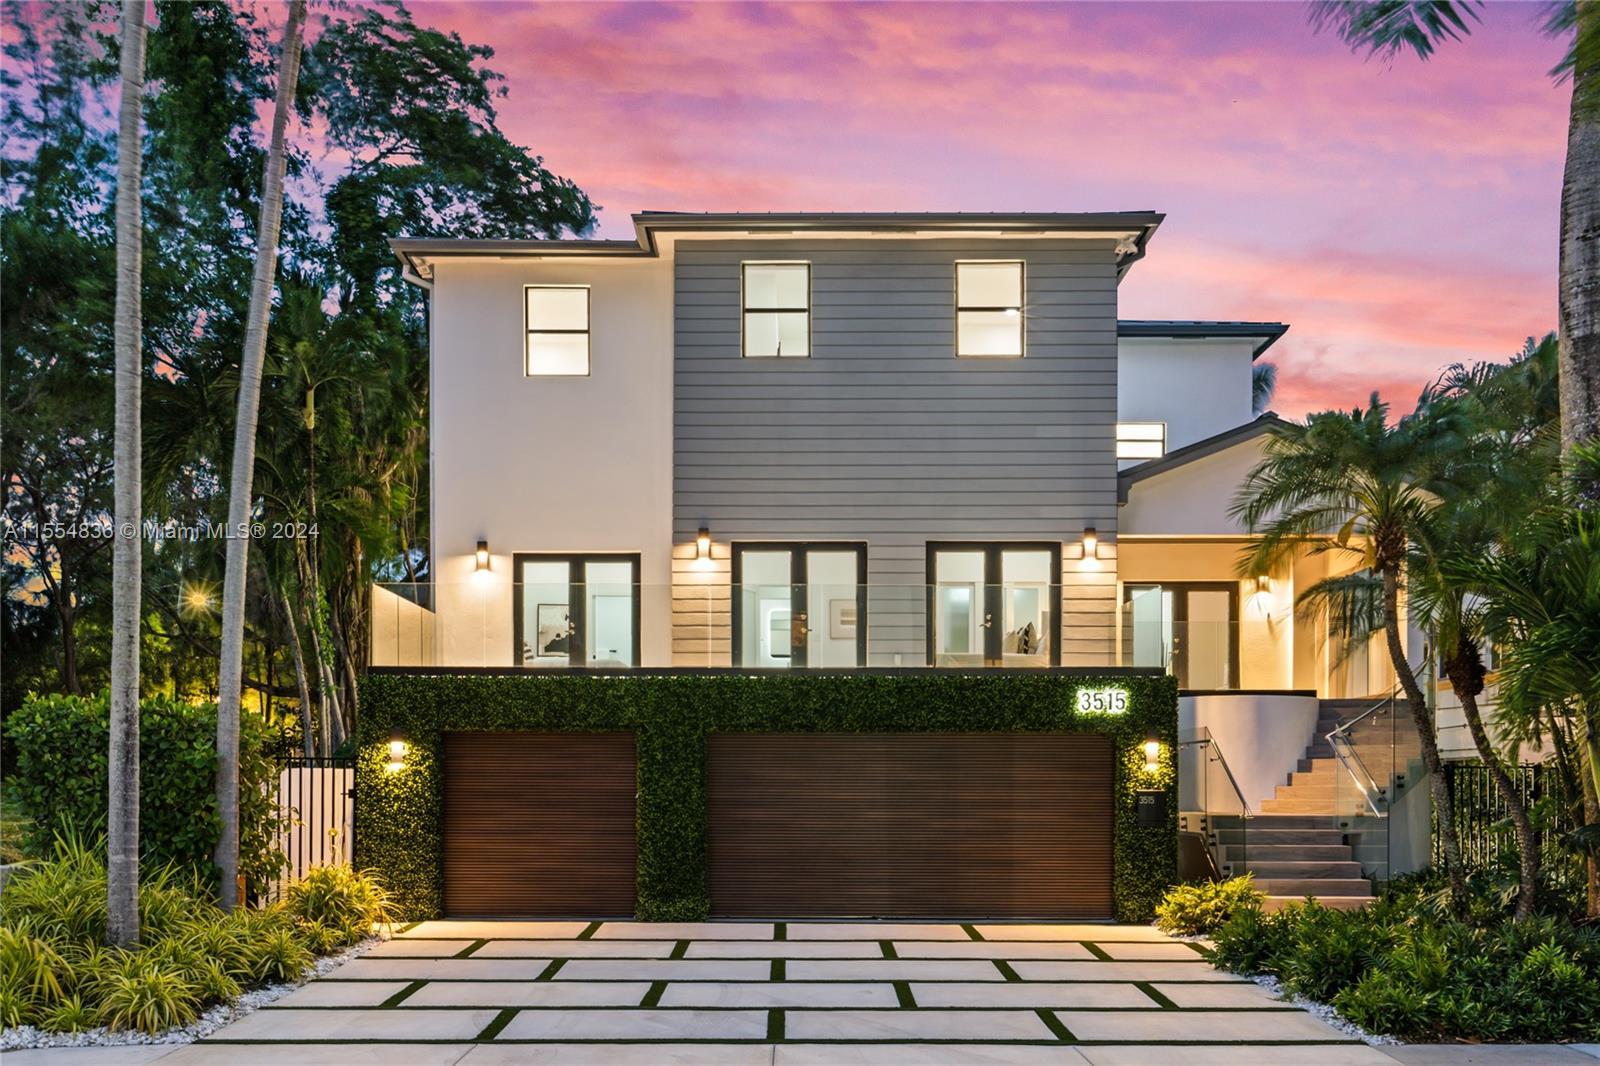 Stunning traditional modern 6 bed 7 bath 3 story home in highly desirable Northeast Coconut Grove. L